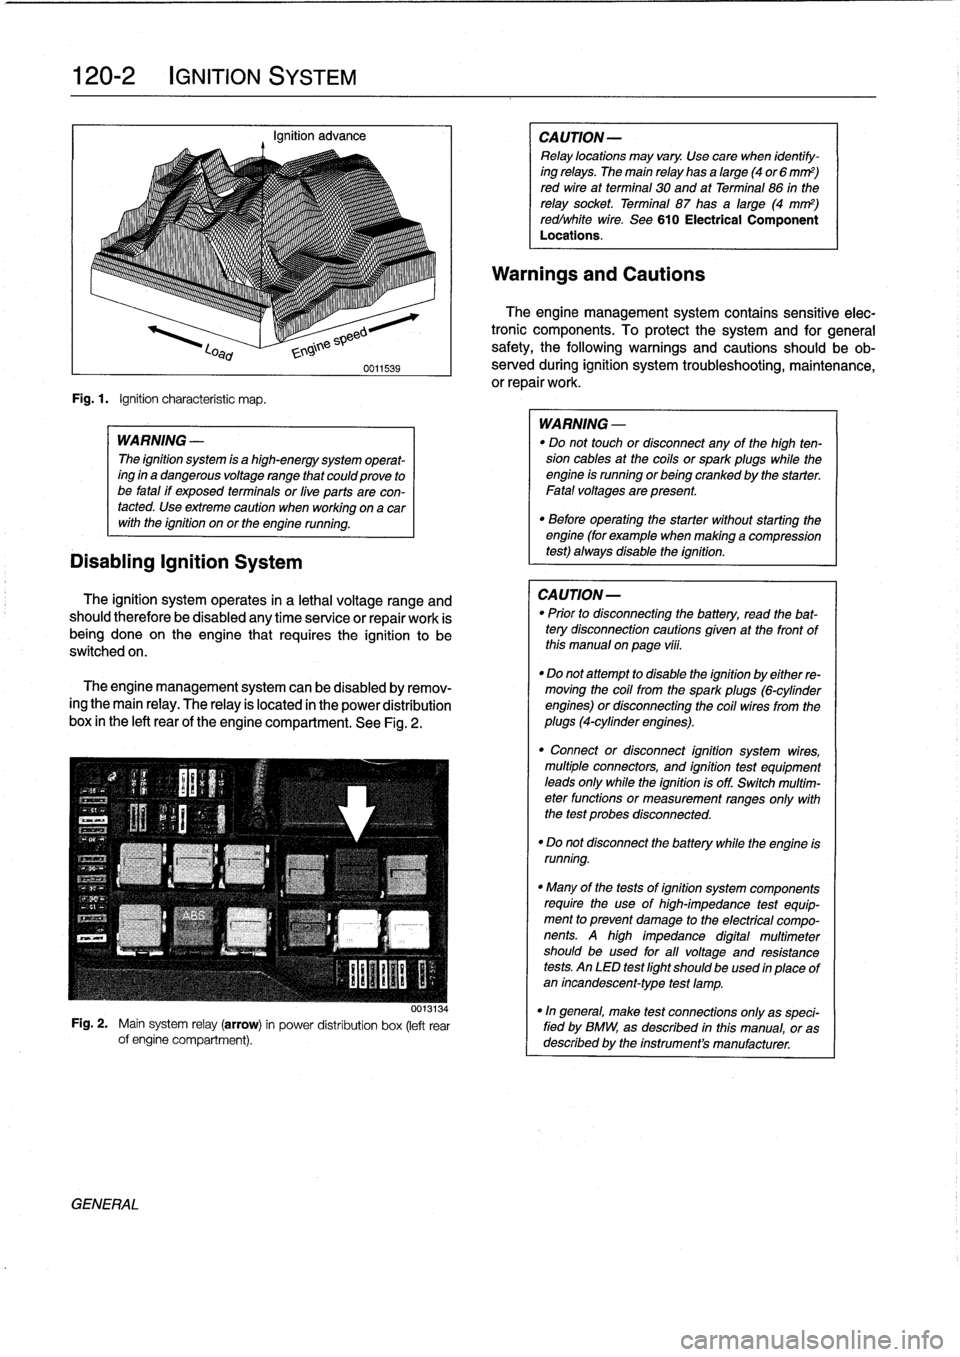 BMW M3 1995 E36 Workshop Manual 
120-2

	

IGNITION
SYSTEM

Fig
.1
.

	

Ignition
characteristic
map
.

Disabling
Ignition
System

WARNING
-

The
ignition
system
is
a
high-energy
system
operat-
ing
in
a
dangerous
voltage
range
that
